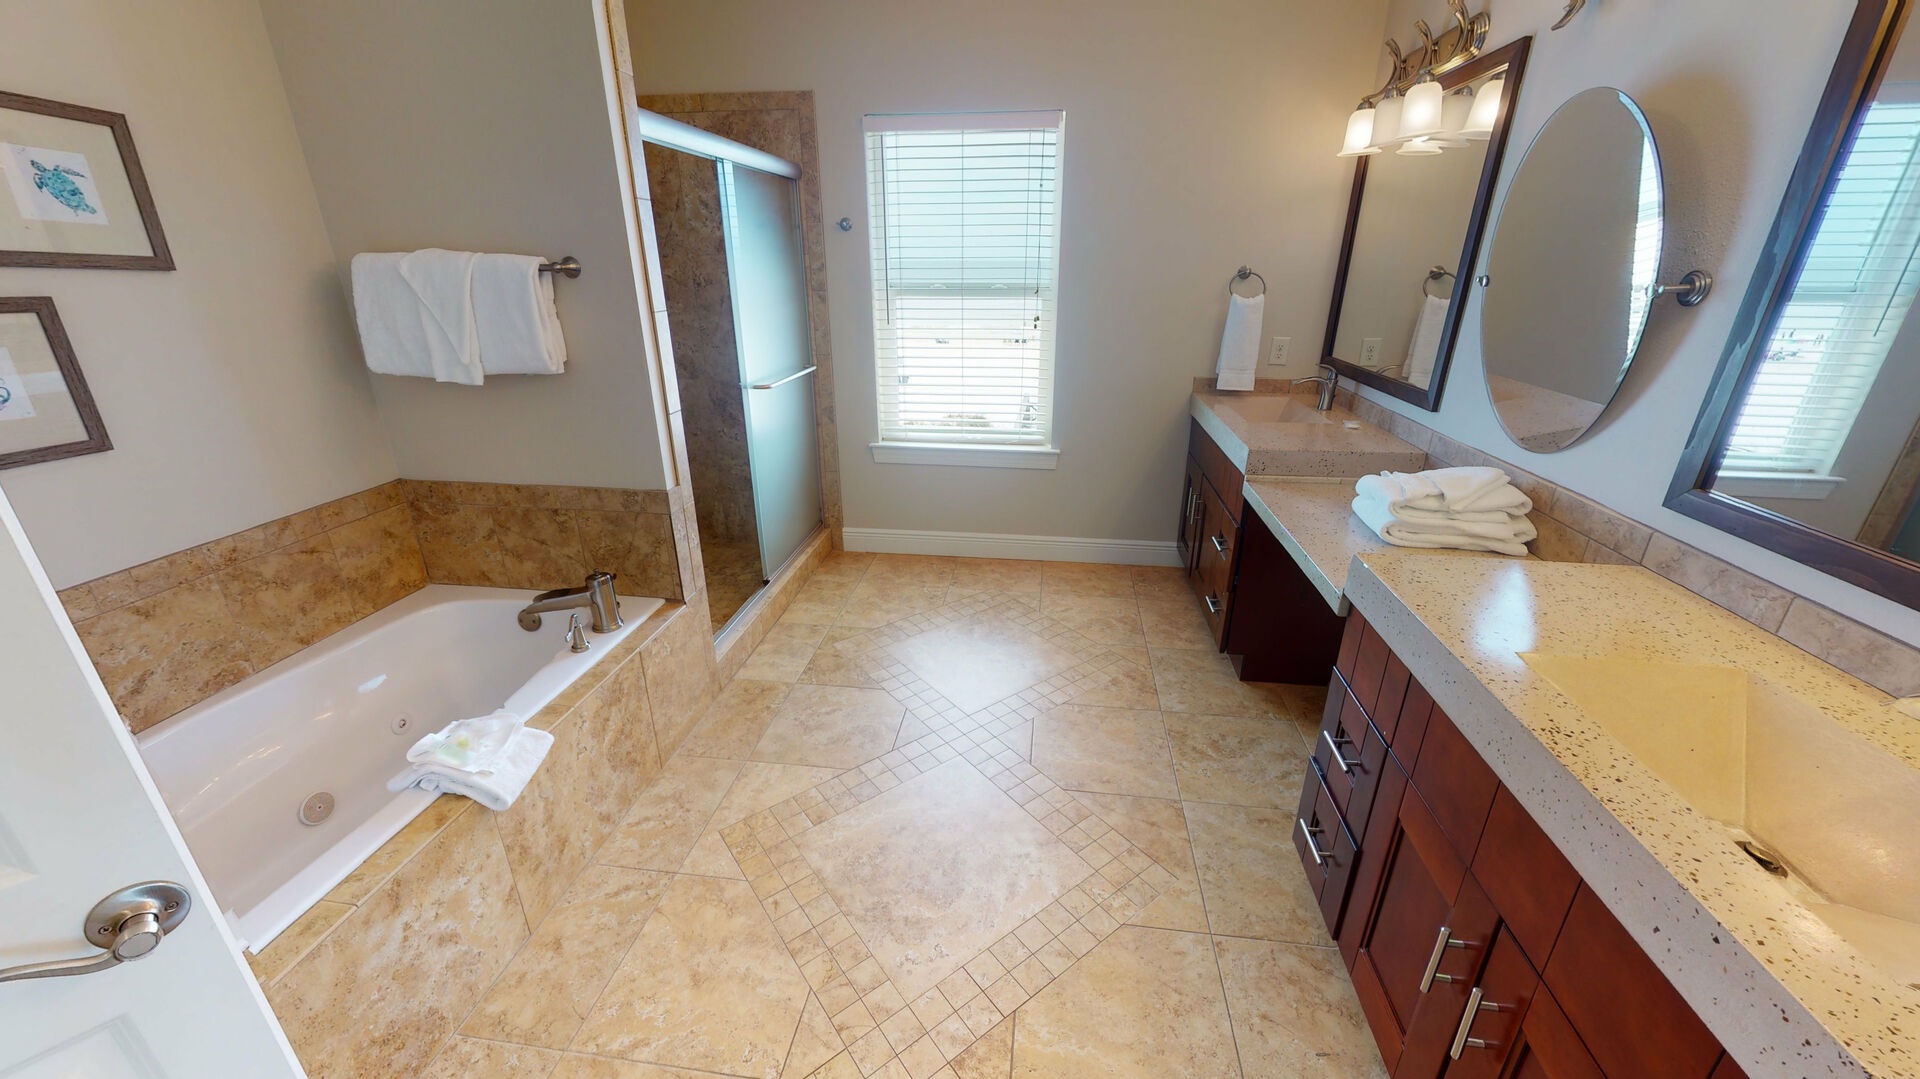 Private Master bath with a double vanity, walk-in shower and a soaking tub